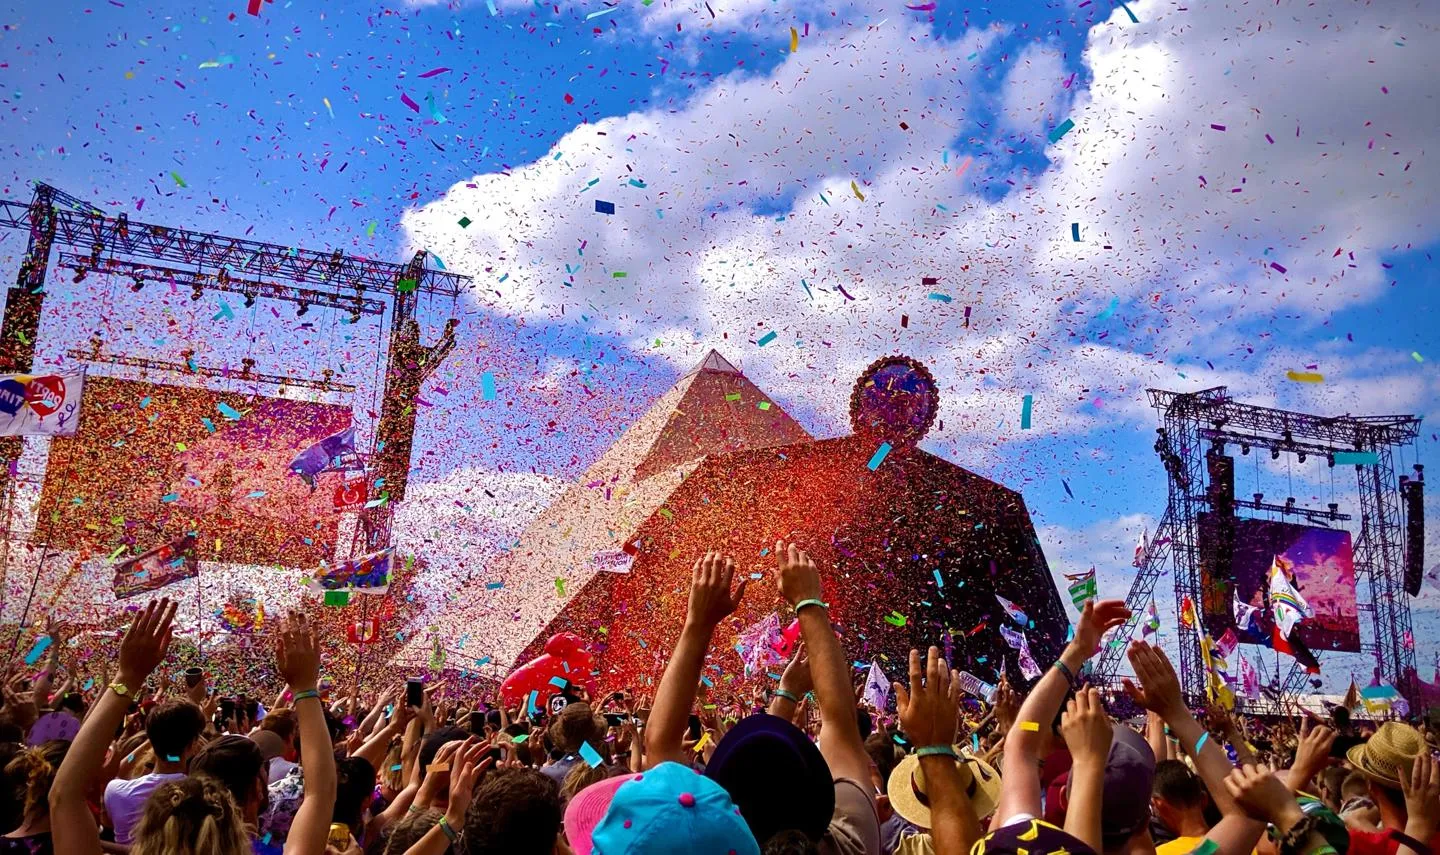 The Pyramid Stage at Glastonbury with confetti in the air and a rapturous crowd